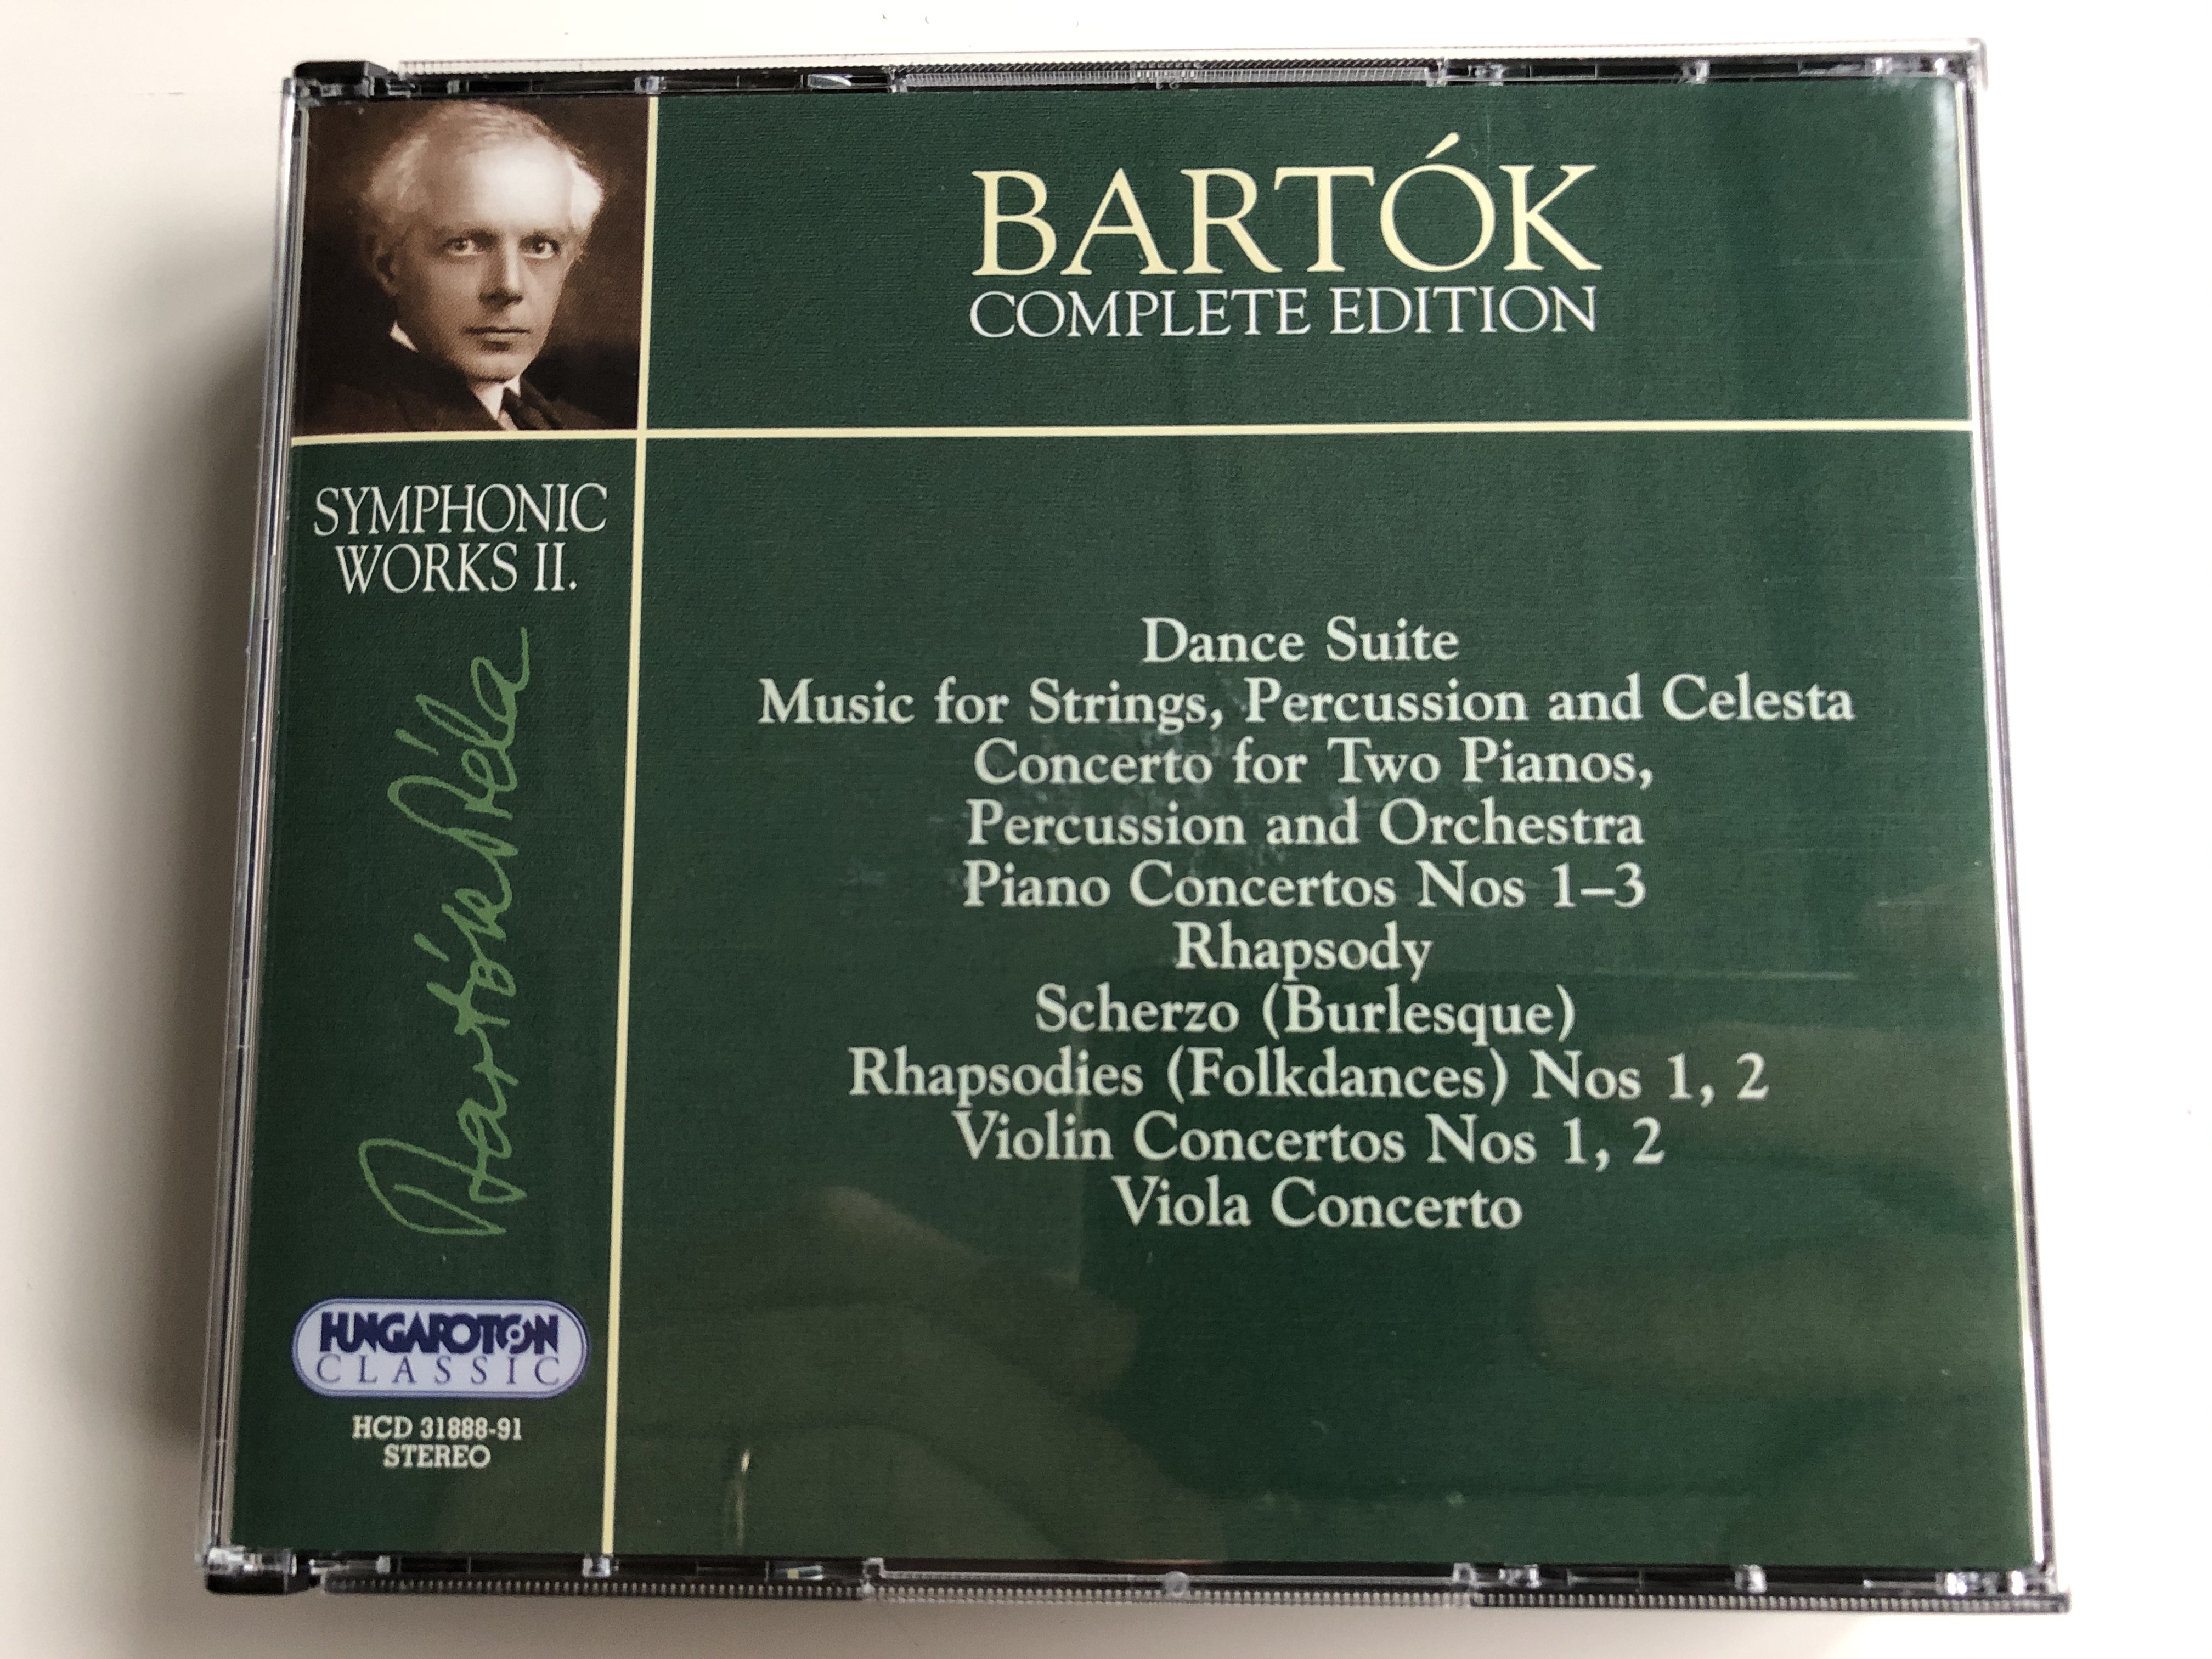 bartok-complete-edition-symphonic-works-ii.-dance-suite-music-for-strings-percussion-and-celesta-concerto-for-two-pianos-percussion-and-orchestra-piano-concertos-nos-1-3-rhapsody-hungarot-1-.jpg